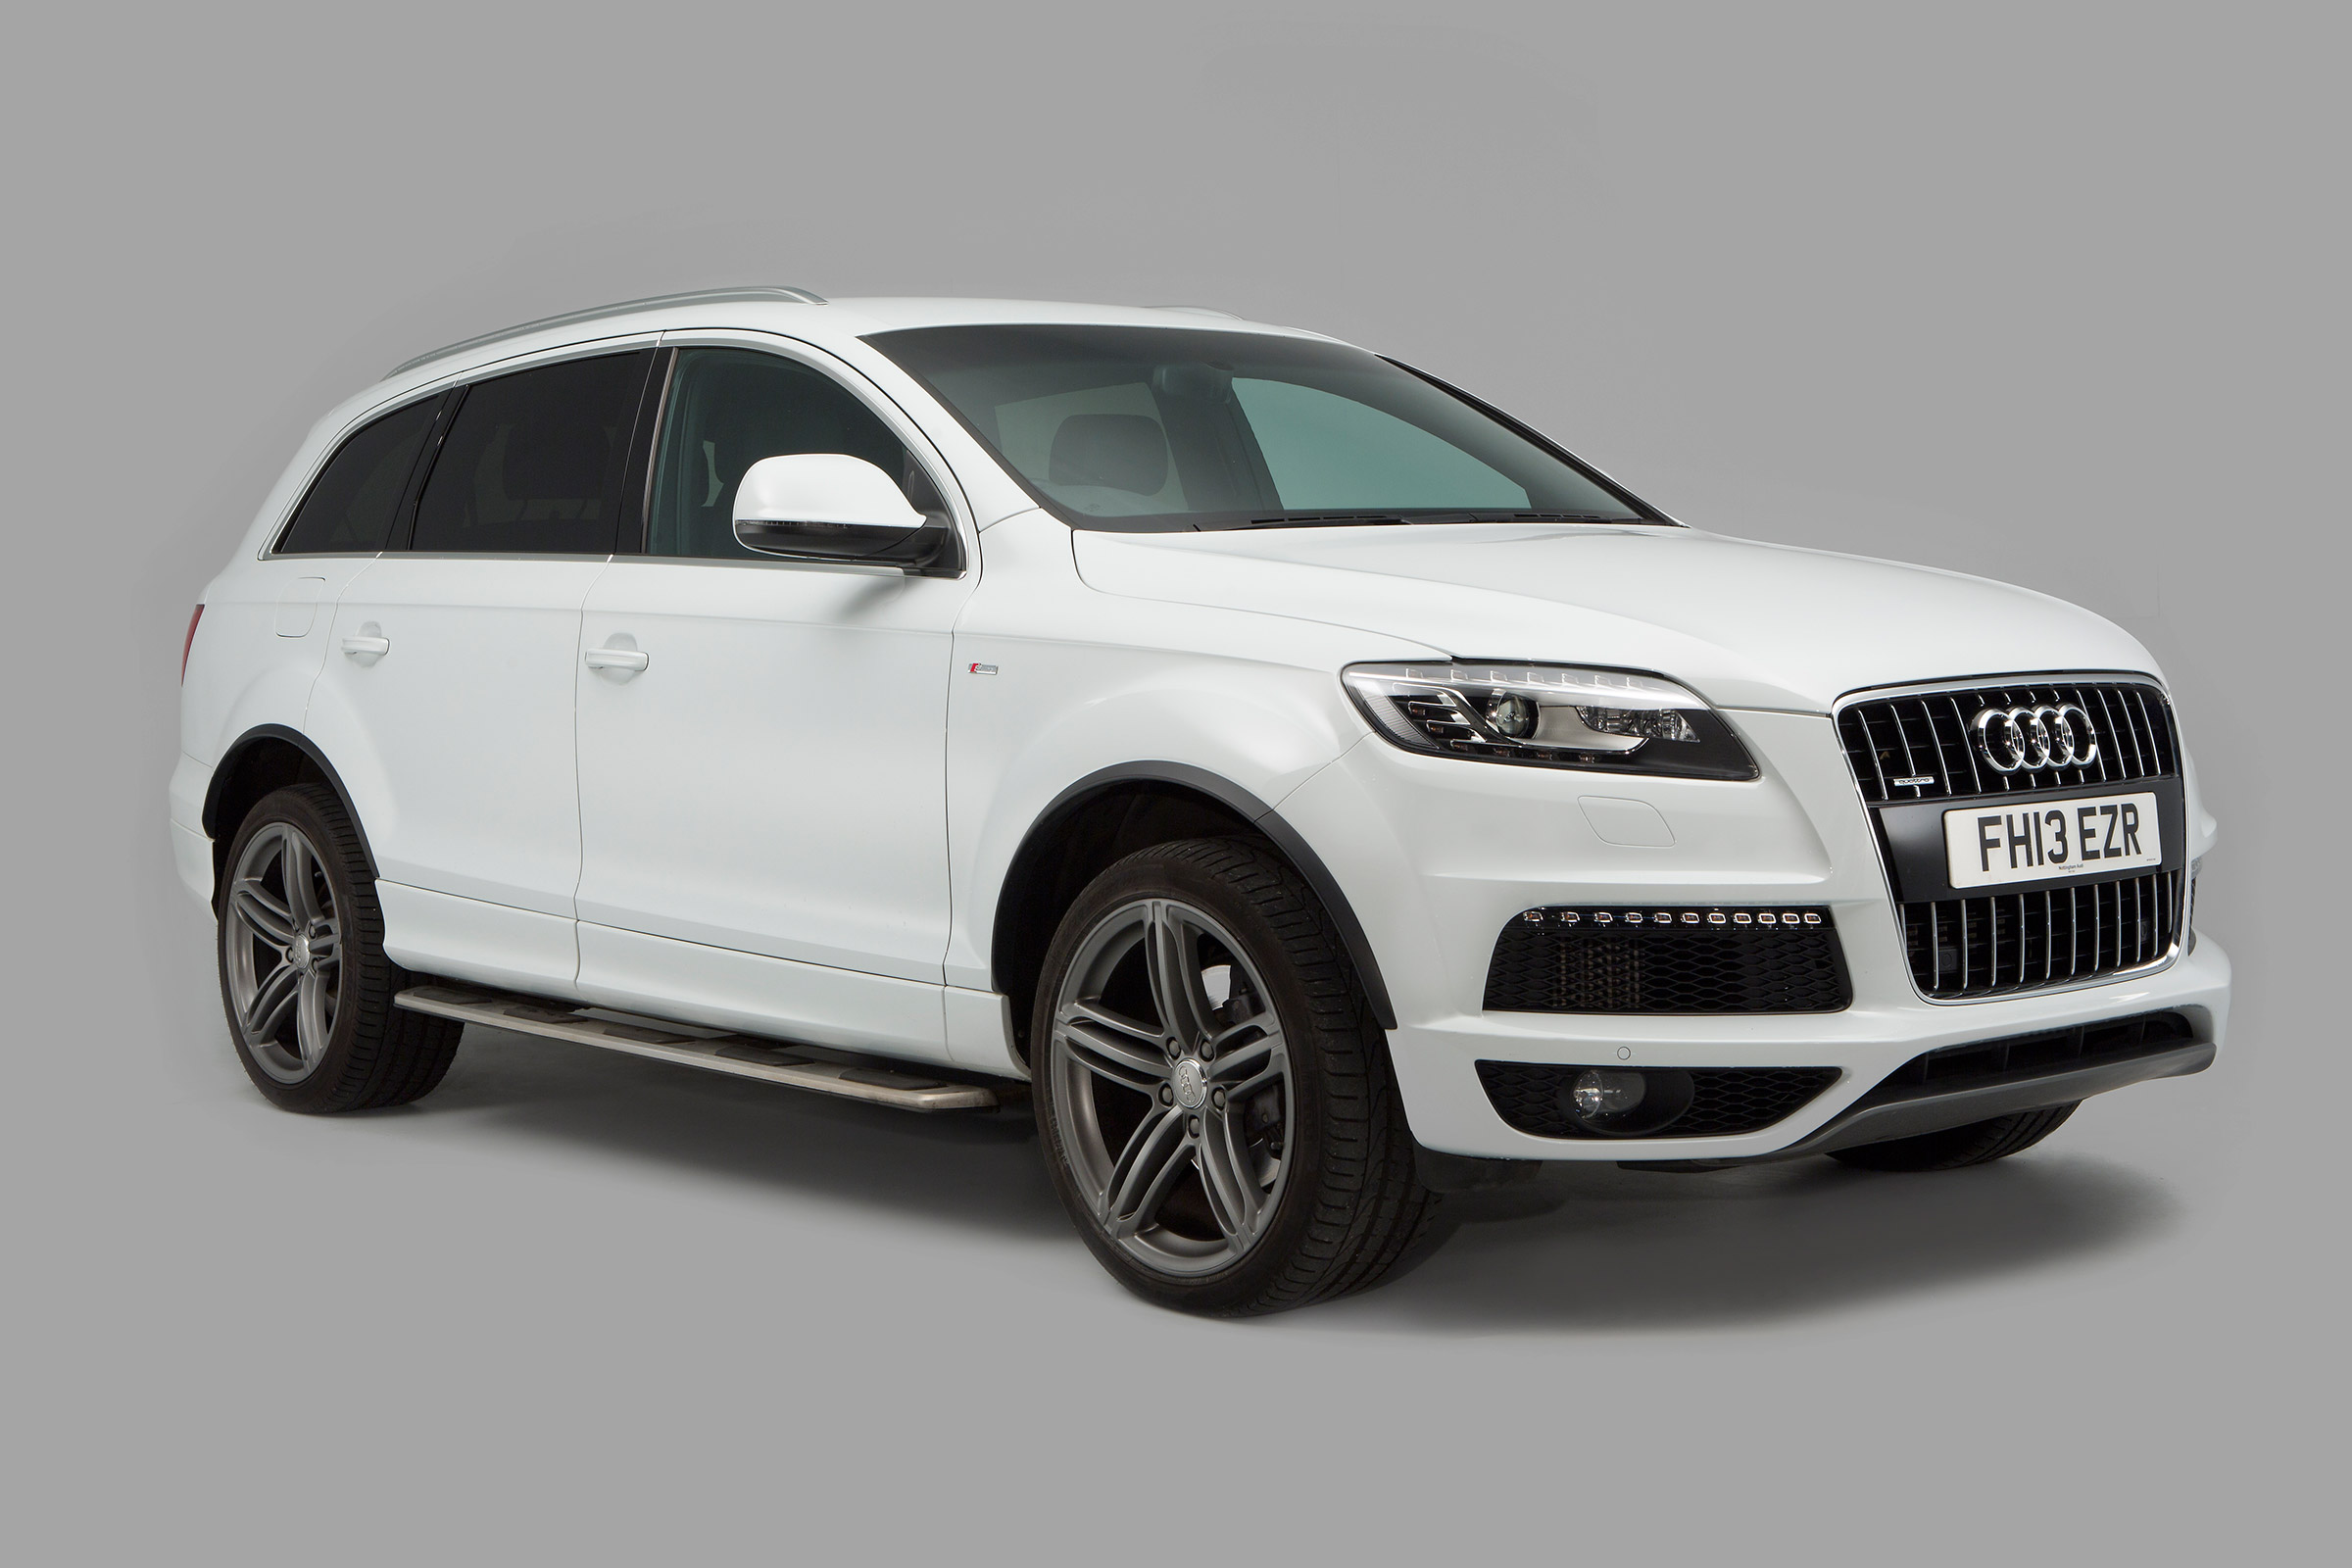 Used Audi Q7 buyer's guide | Auto Express